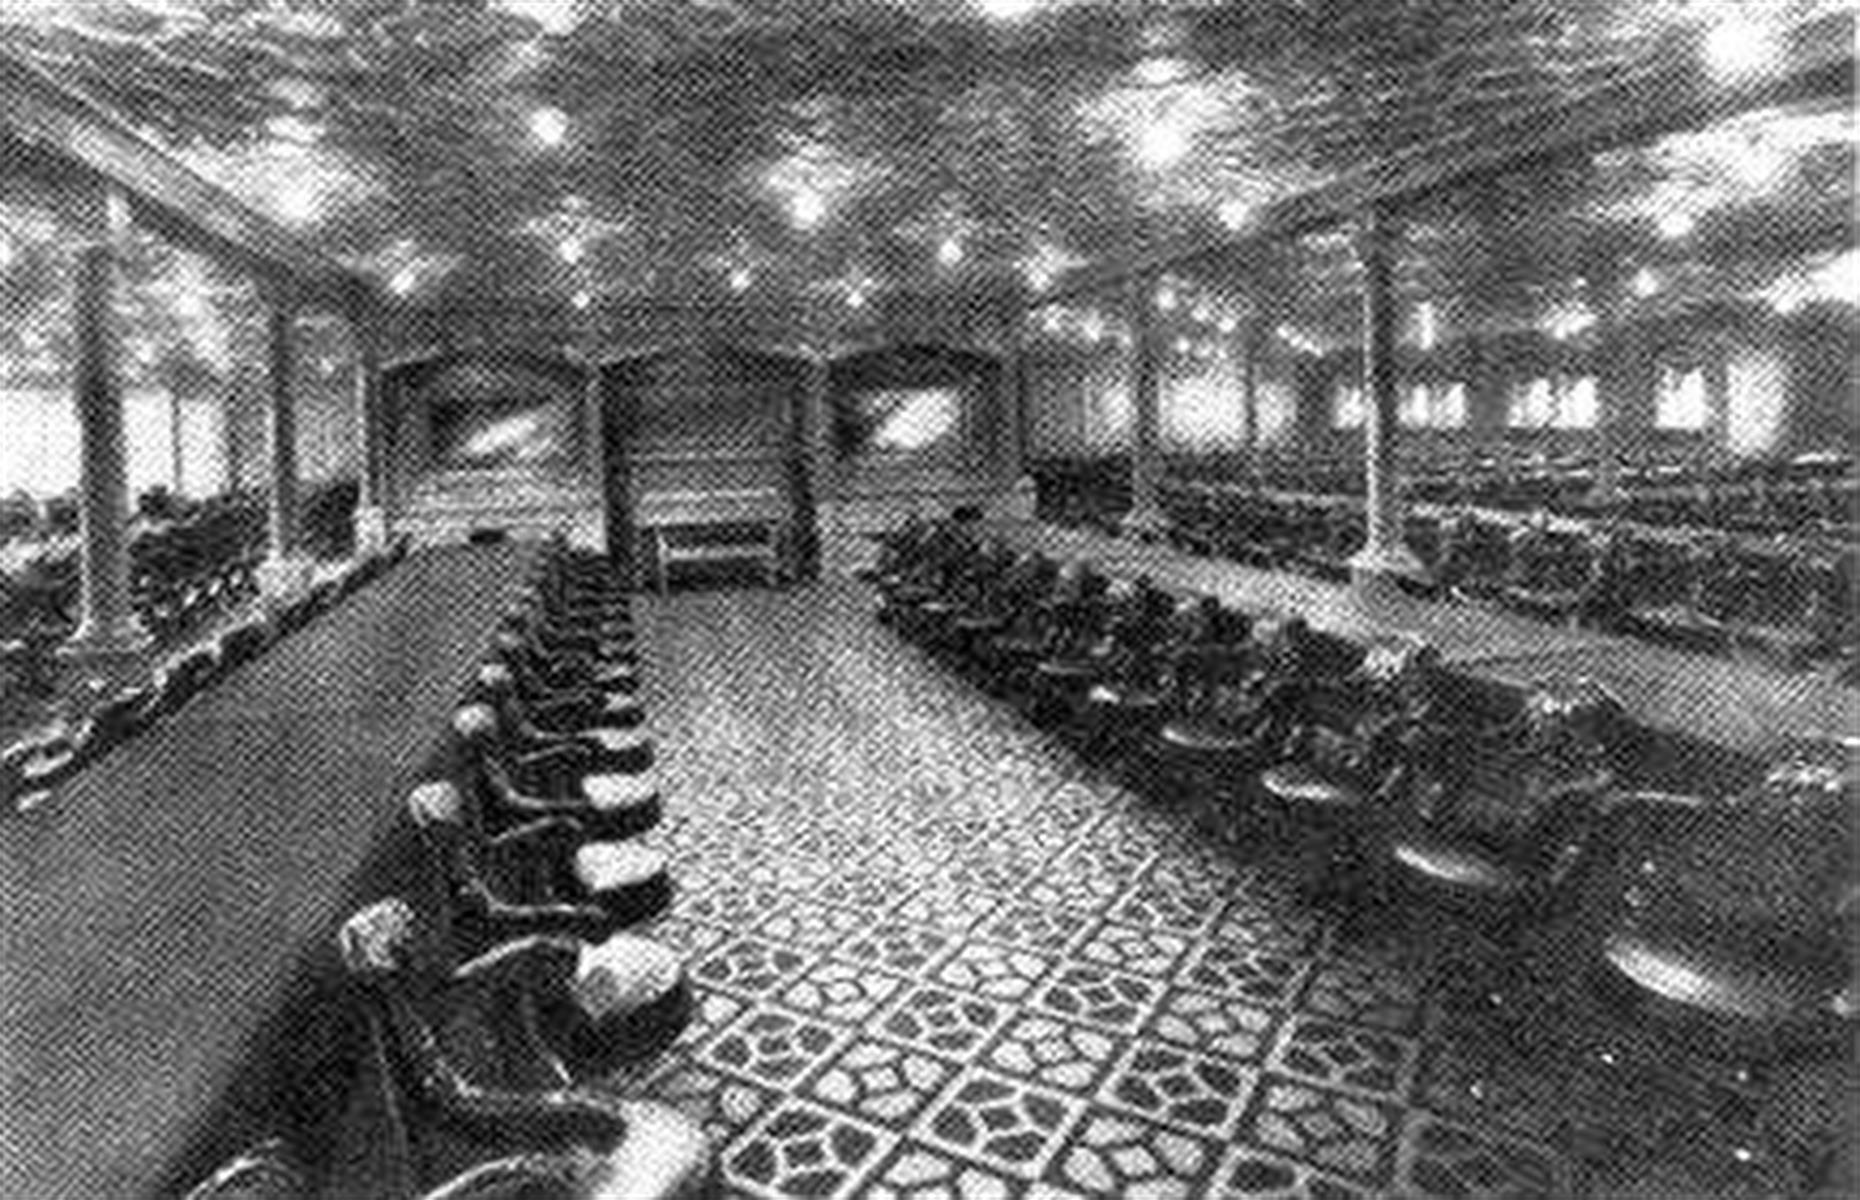 While not as grand as first-class dining facilities, the second-class dining room was still a sight to behold. It was an attractive space big enough to seat all second-class passengers, with oak-paneled walls, colored linoleum floors, long tables and mahogany swivel chairs. Pictured here is the second-class dining room on the Olympic.